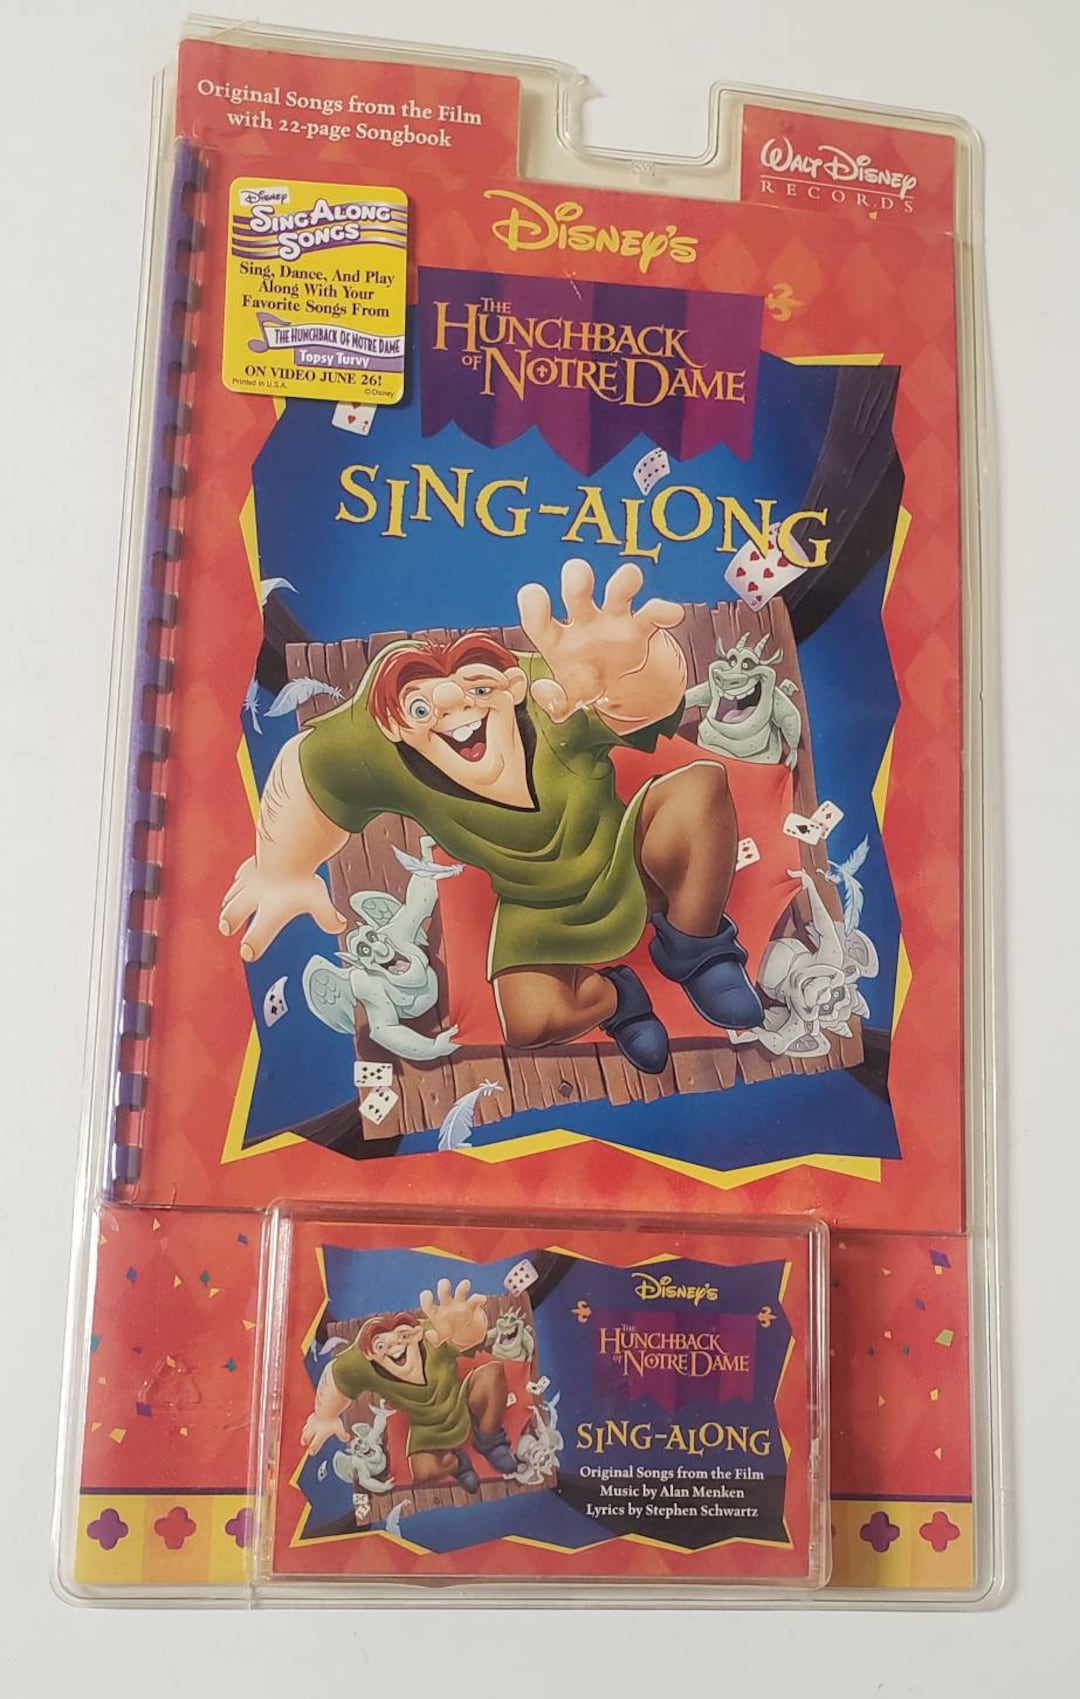 Disney S The Hunchback Of Notre Dame Sing Along Book And Cassette Tape Vintage 1990s New And